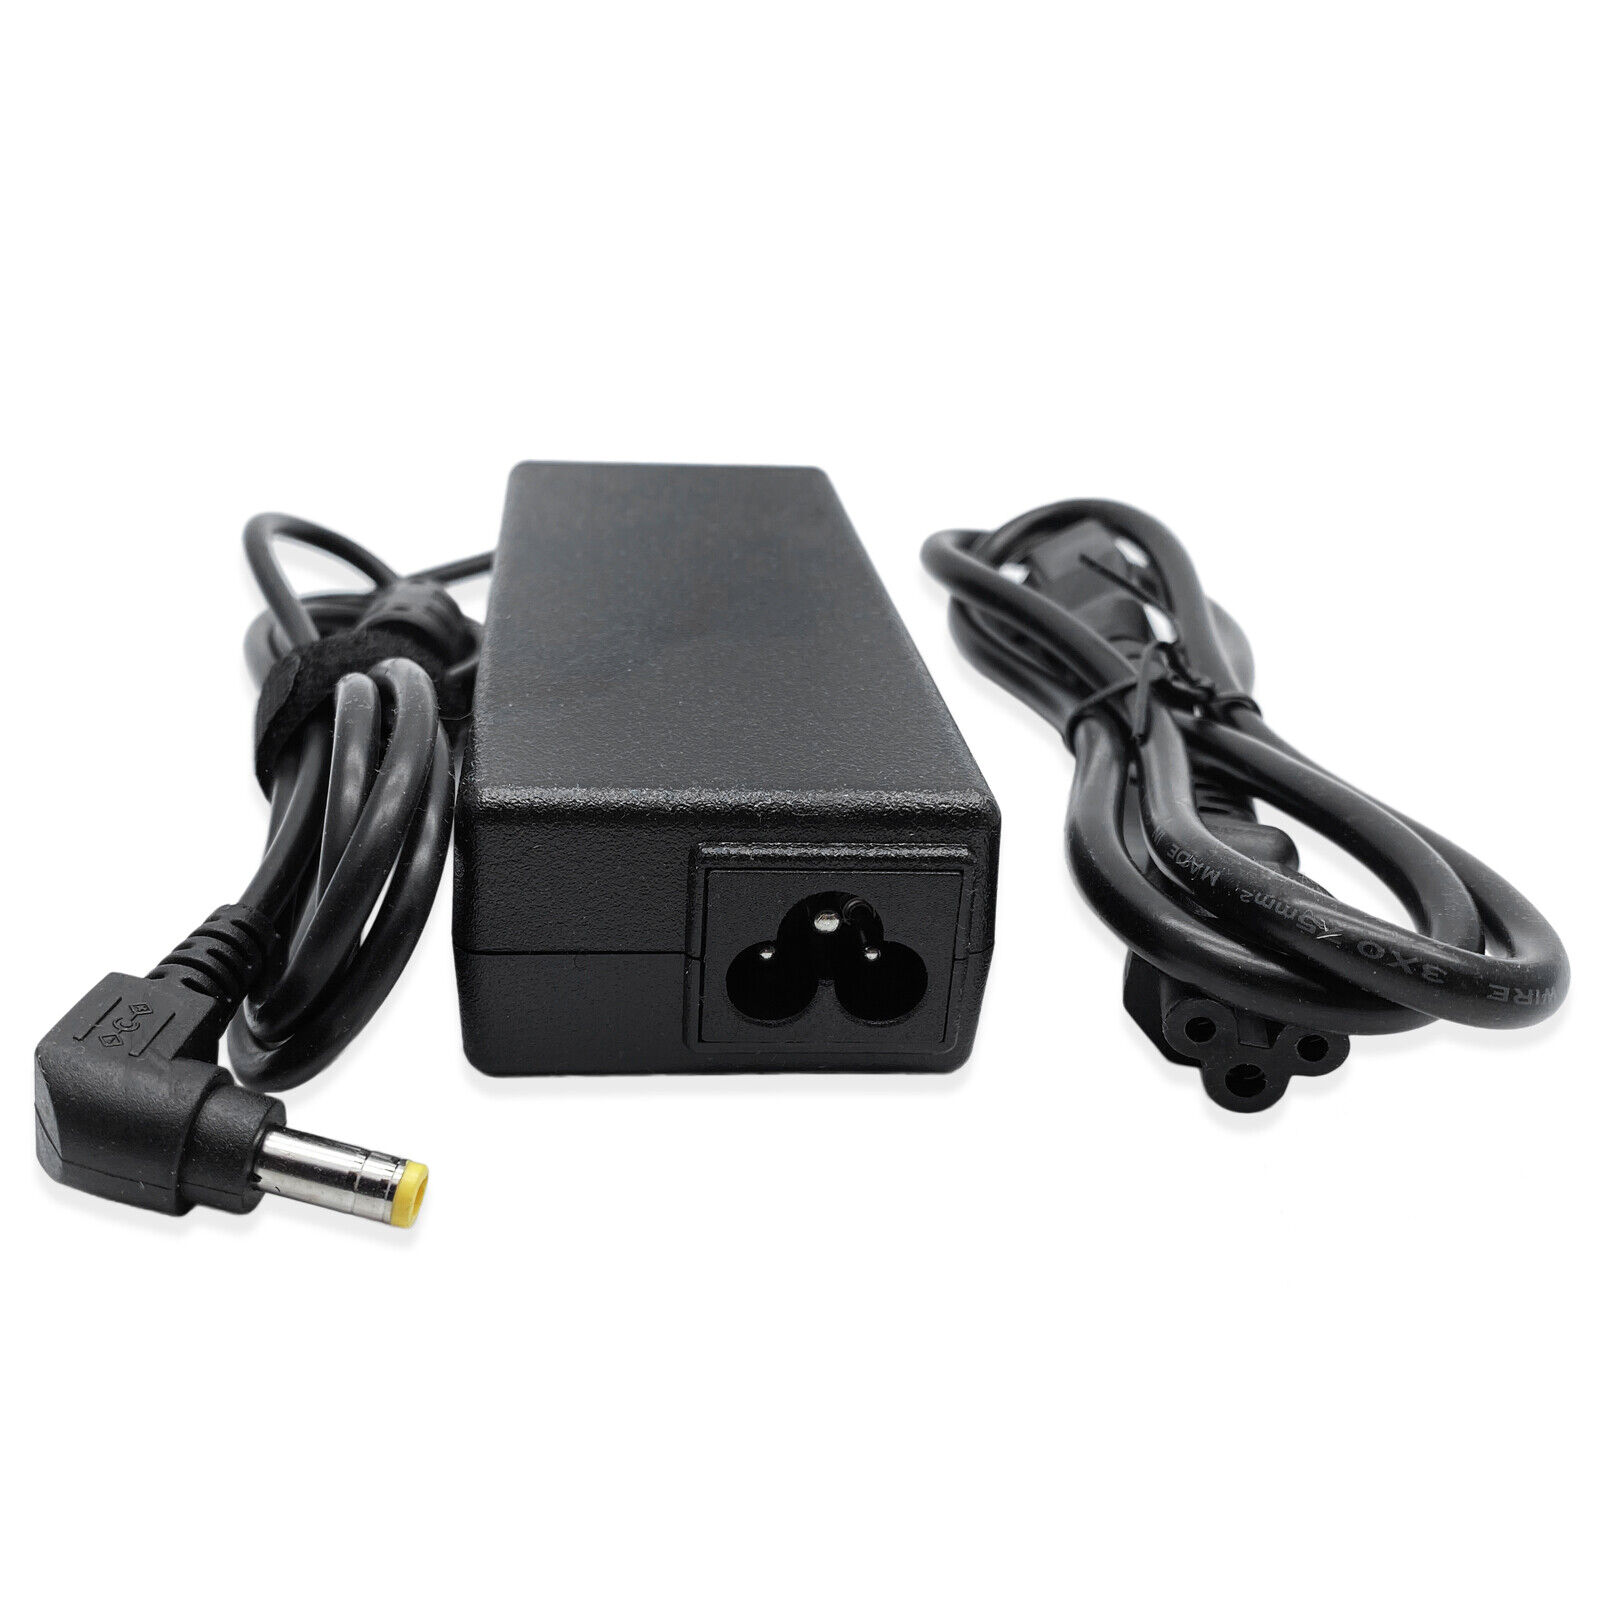 90W New AC Adapter Charger Power Supply Cord For HP COMPAQ nx9000 nx9005 nx9010